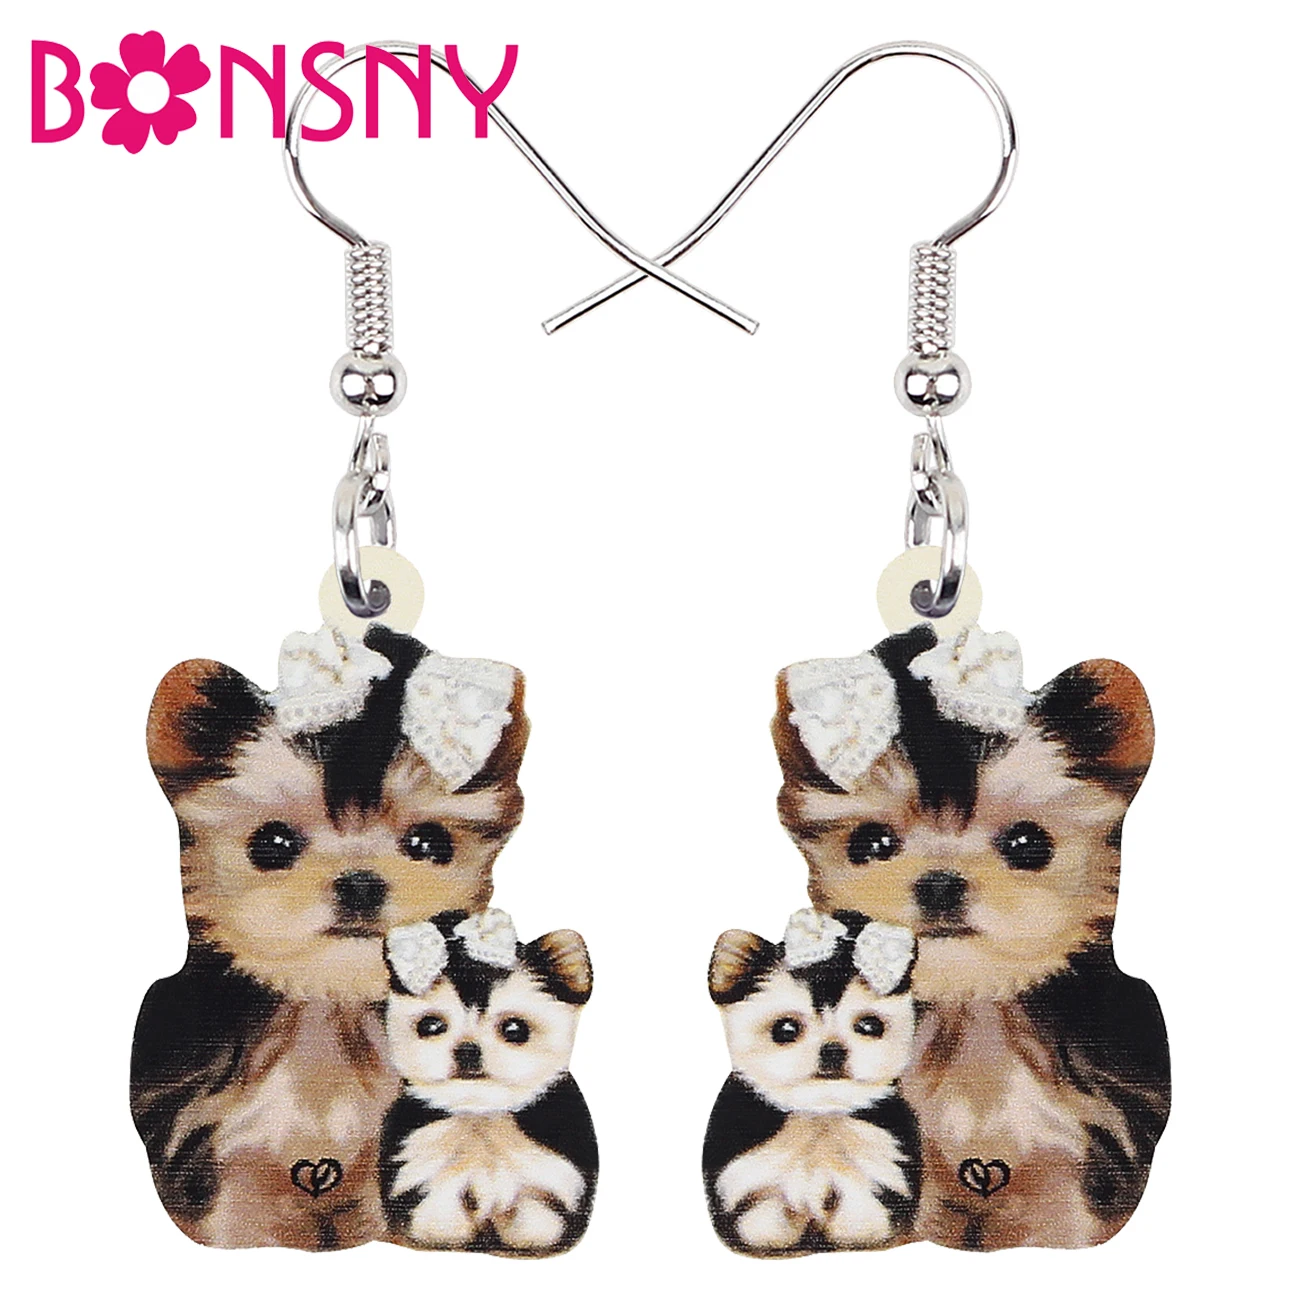 

BONSNY Acrylic Mother's Day Yorkshire Terrier Dogs Earrings Long Drop Dangle Novelty Pets Jewelry For Girl Women Teens Gift